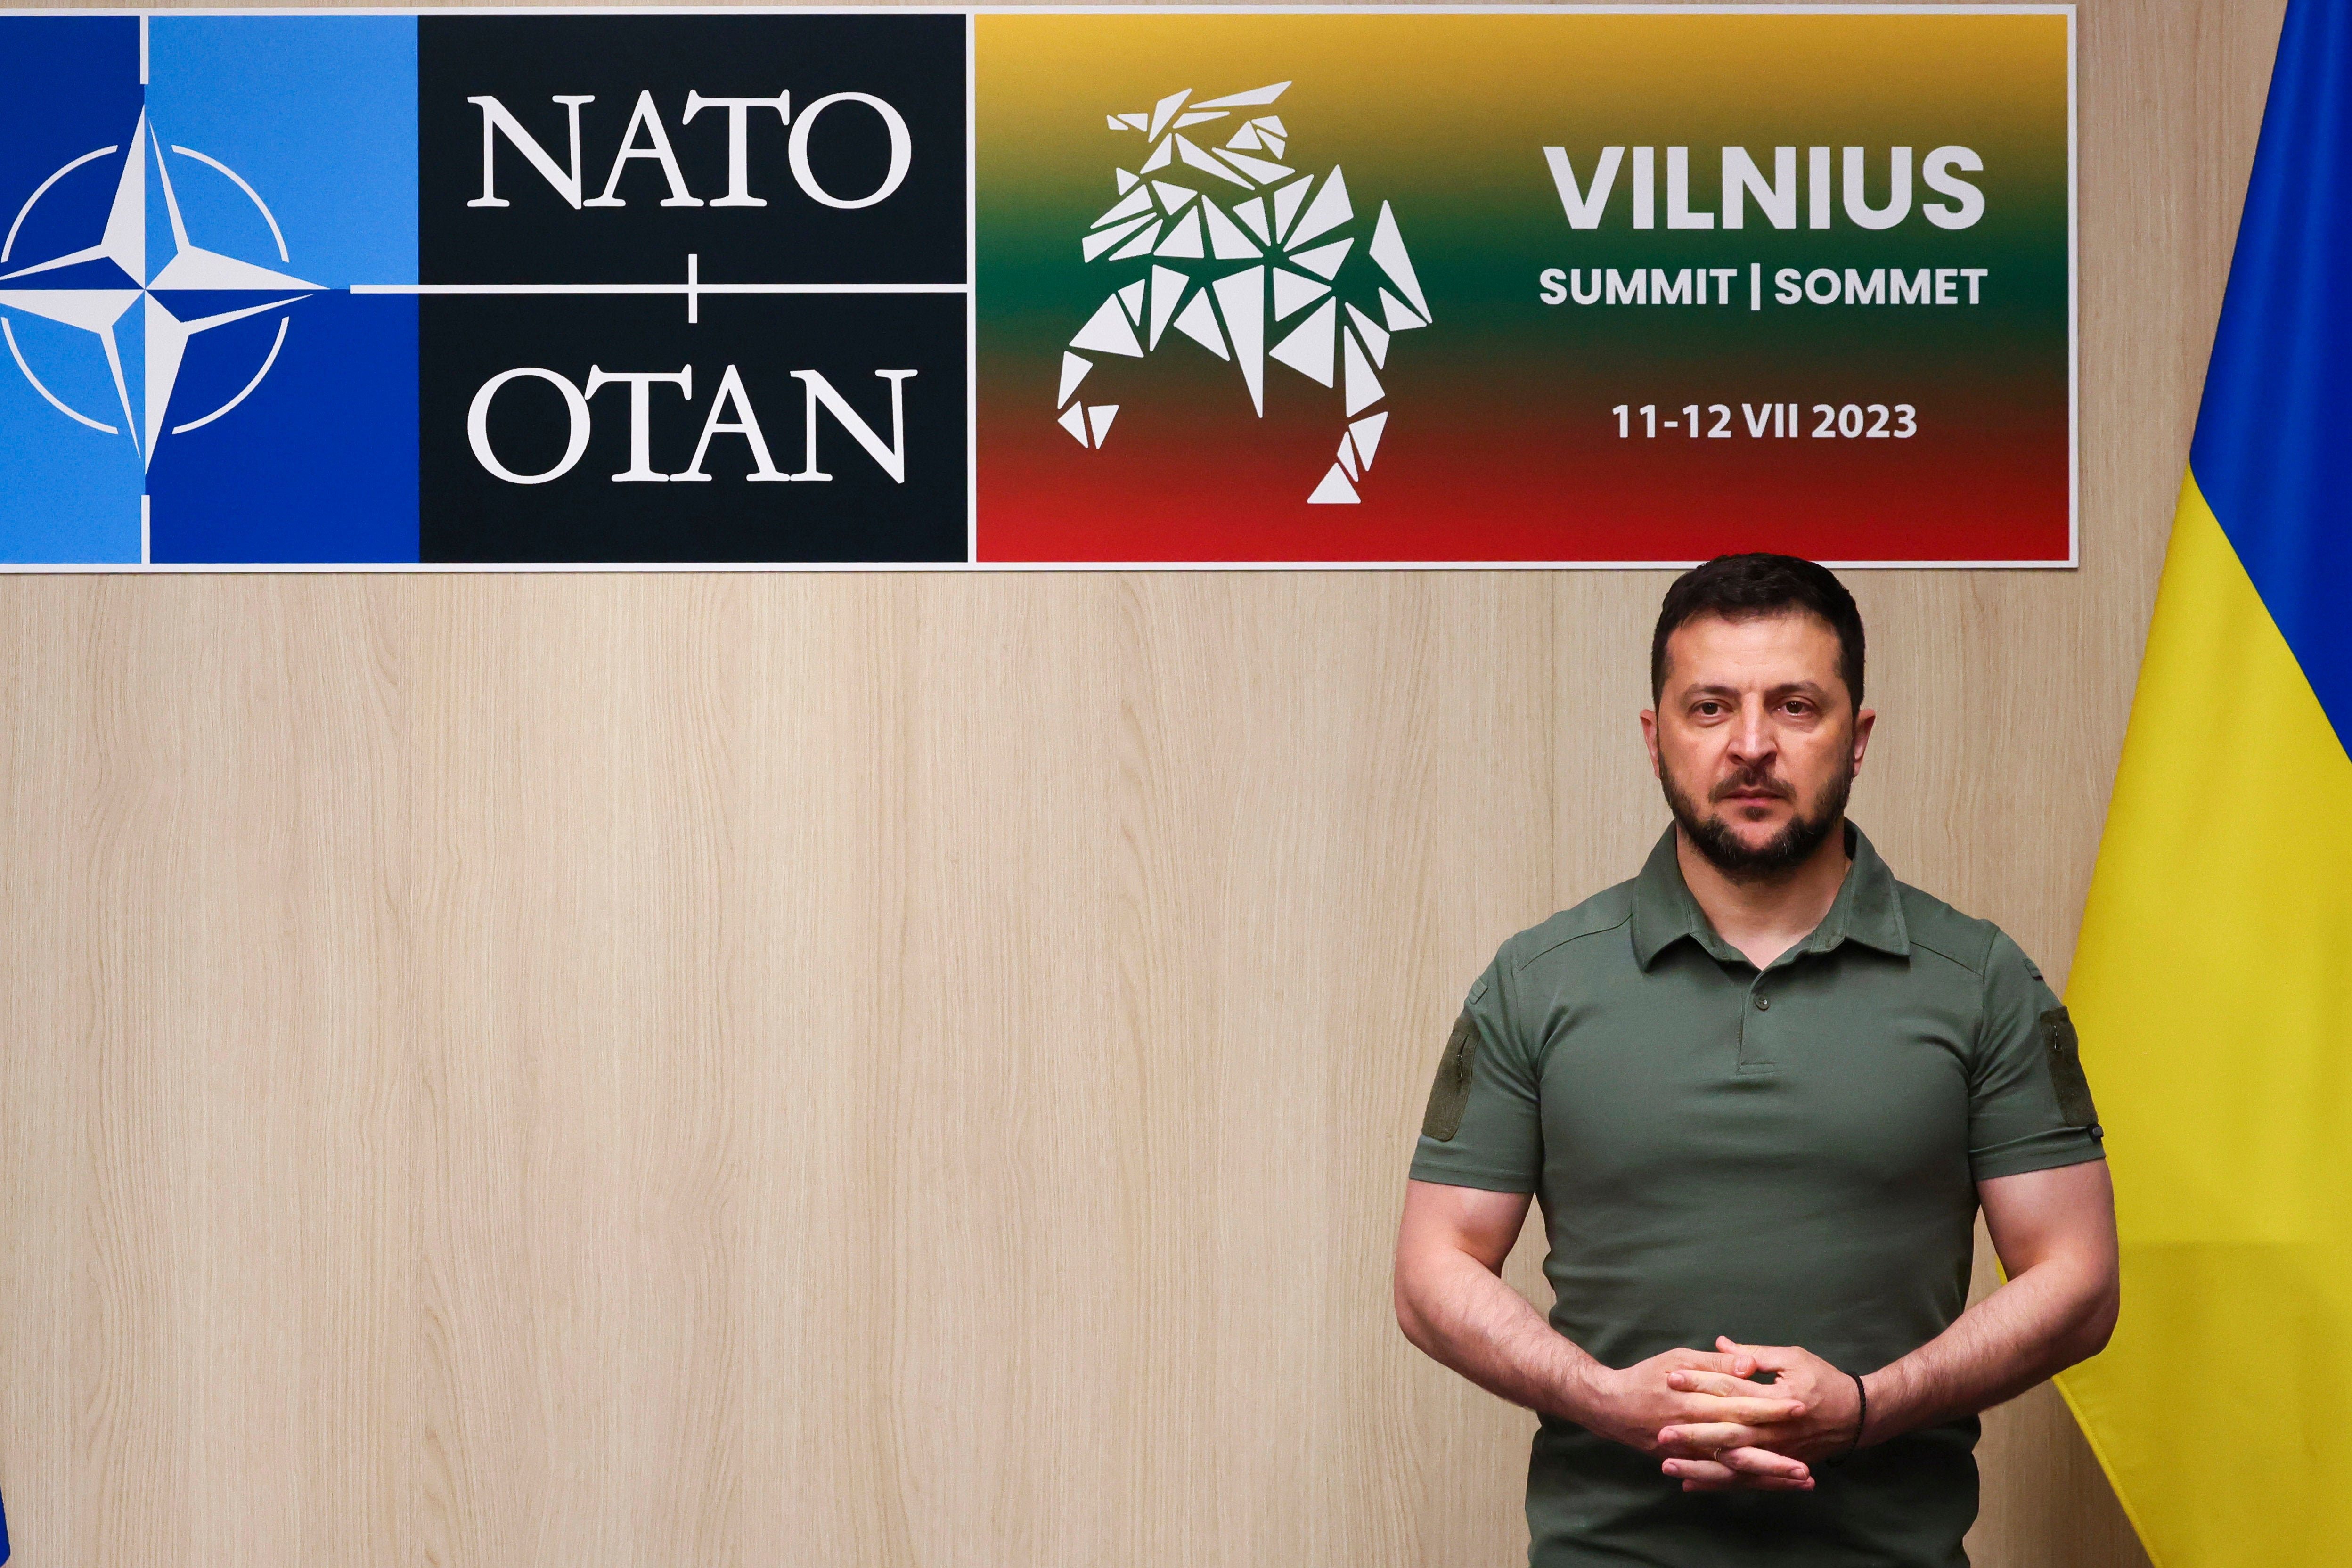 While President Zelensky left Lithuania a disappointed man, Nato showed it is at least trying to avoid the Ukraine conflict spiralling into a wider war